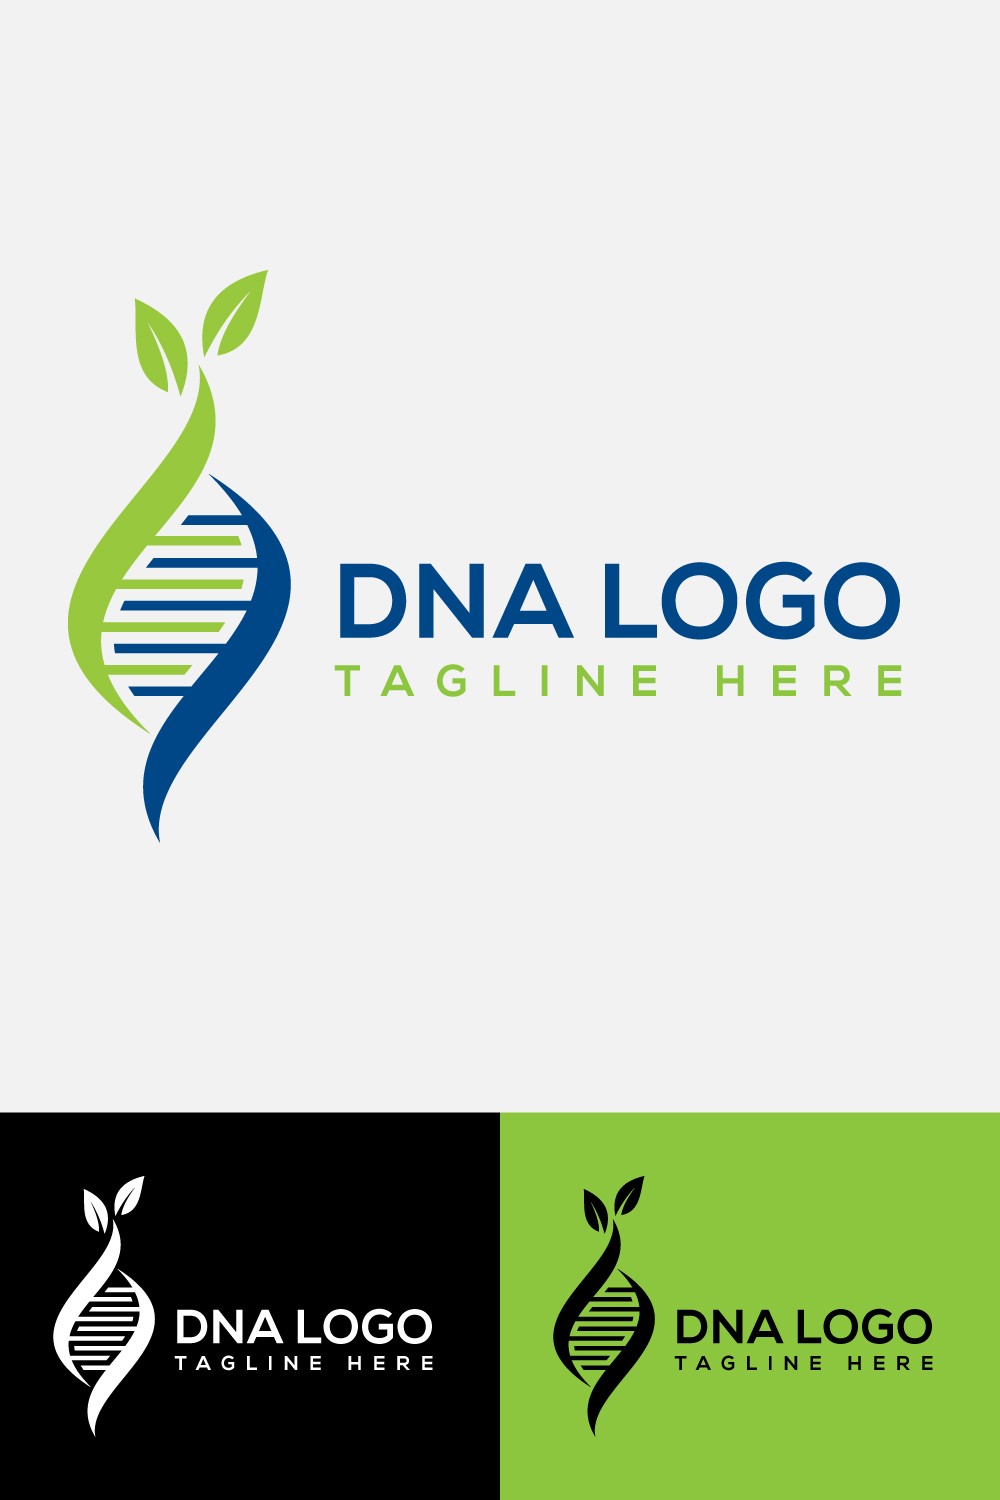 A selection of images of beautiful logos in the form of a DNA shape.